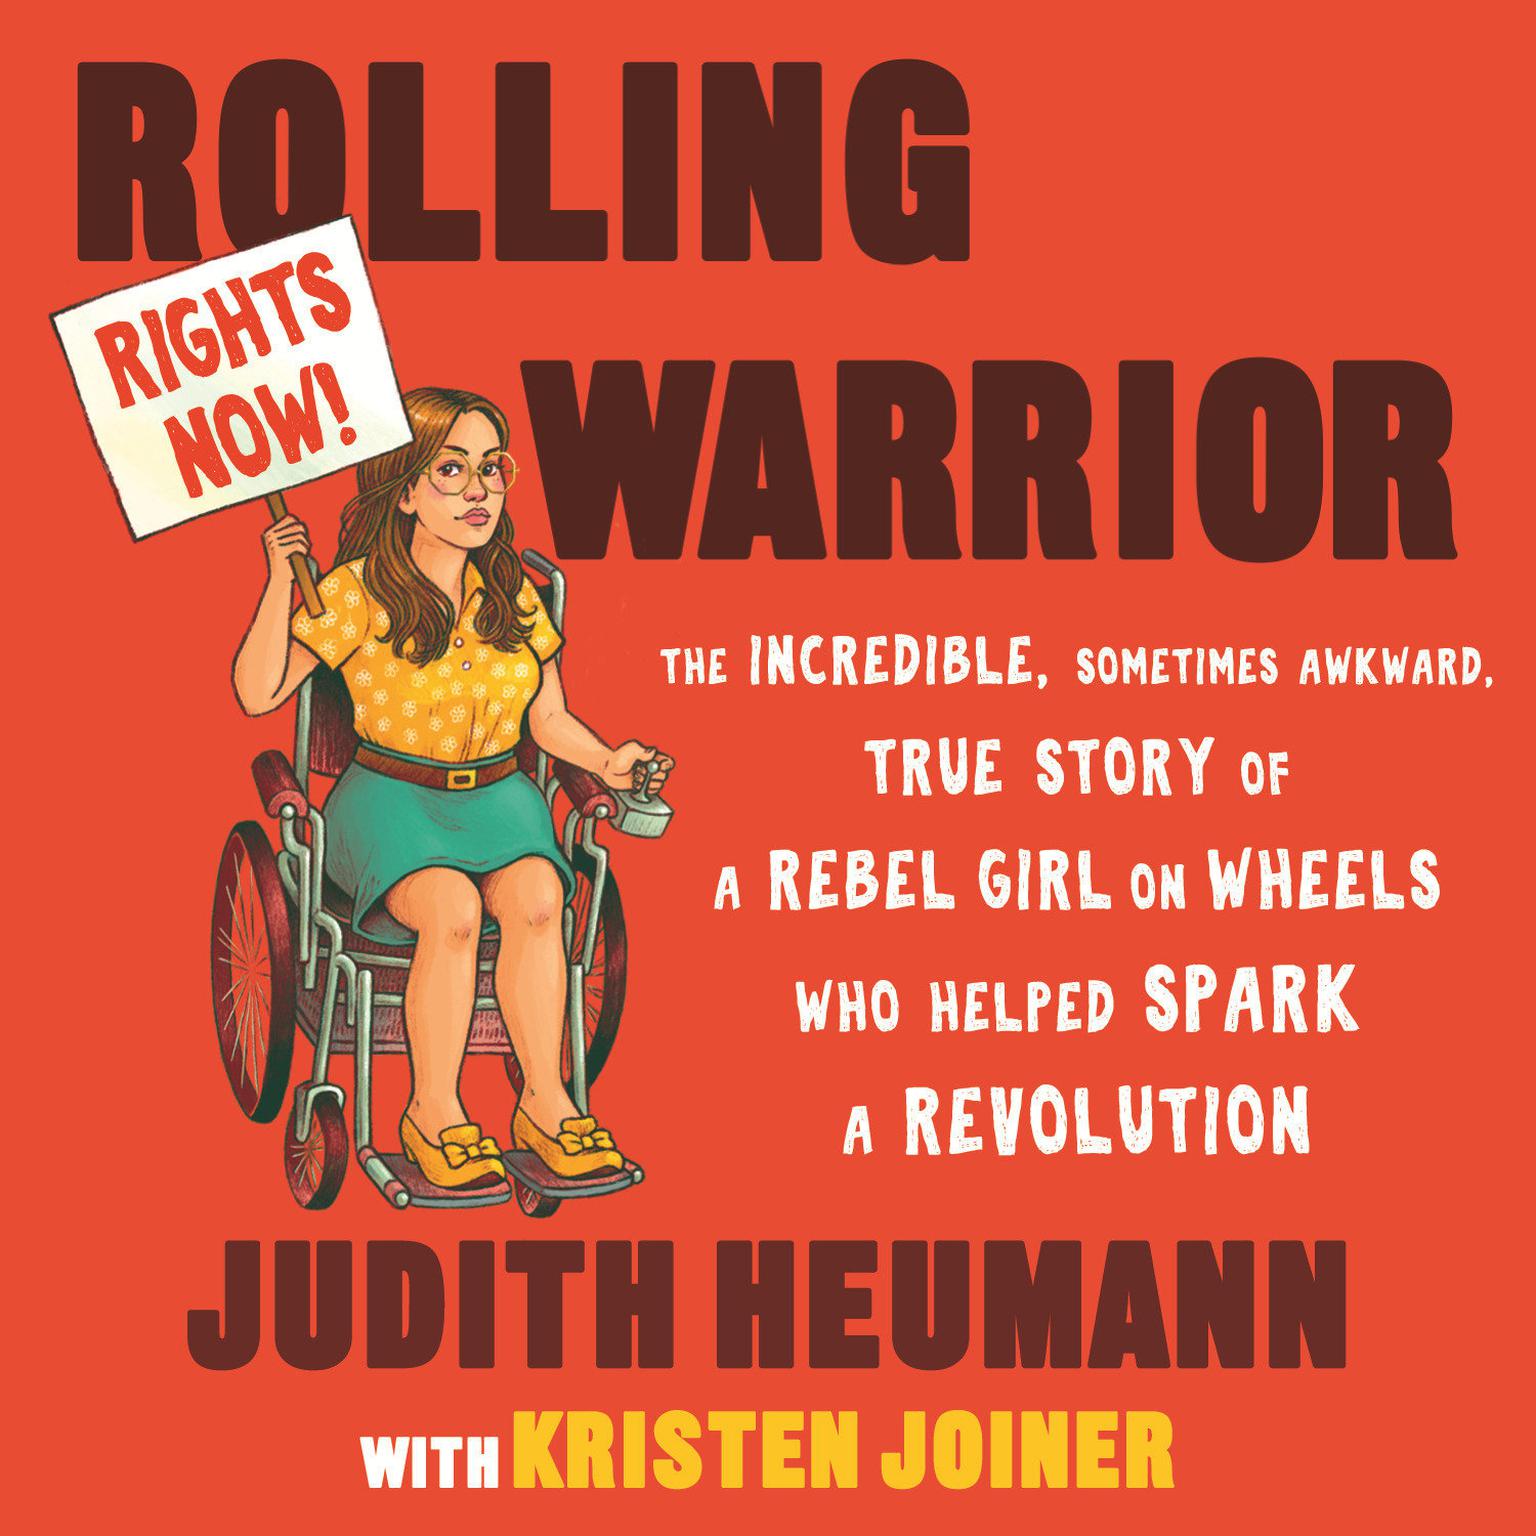 Rolling Warrior: The Incredible, Sometimes Awkward, True Story of a Rebel Girl on Wheels Who Helped Spark a Revolution Audiobook, by Judith Heumann